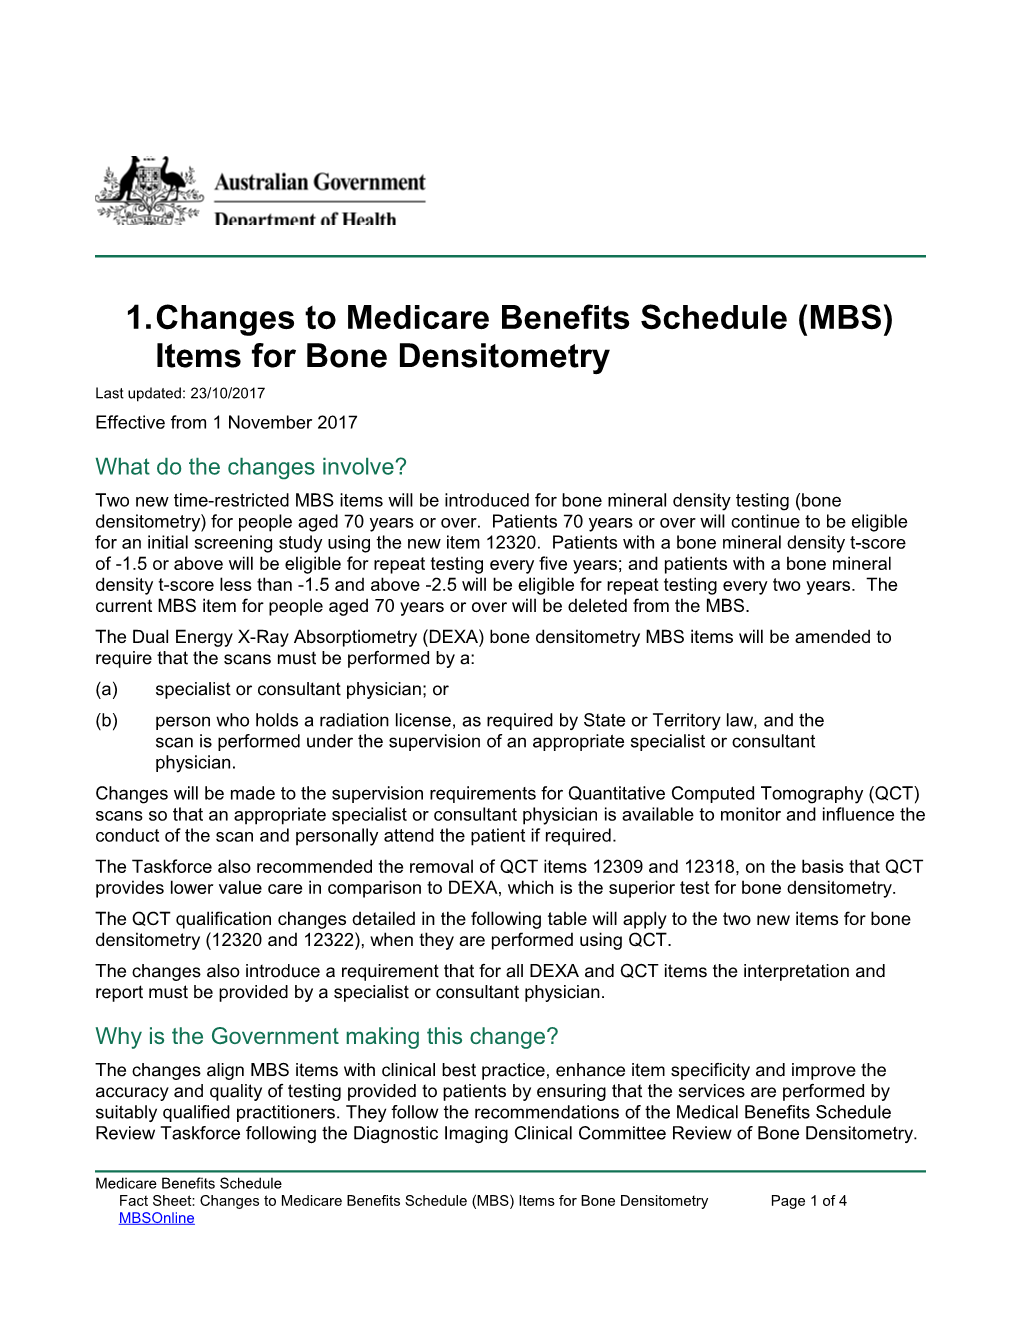 Changes to Medicare Benefits Schedule (MBS) Items for Bone Densitometry